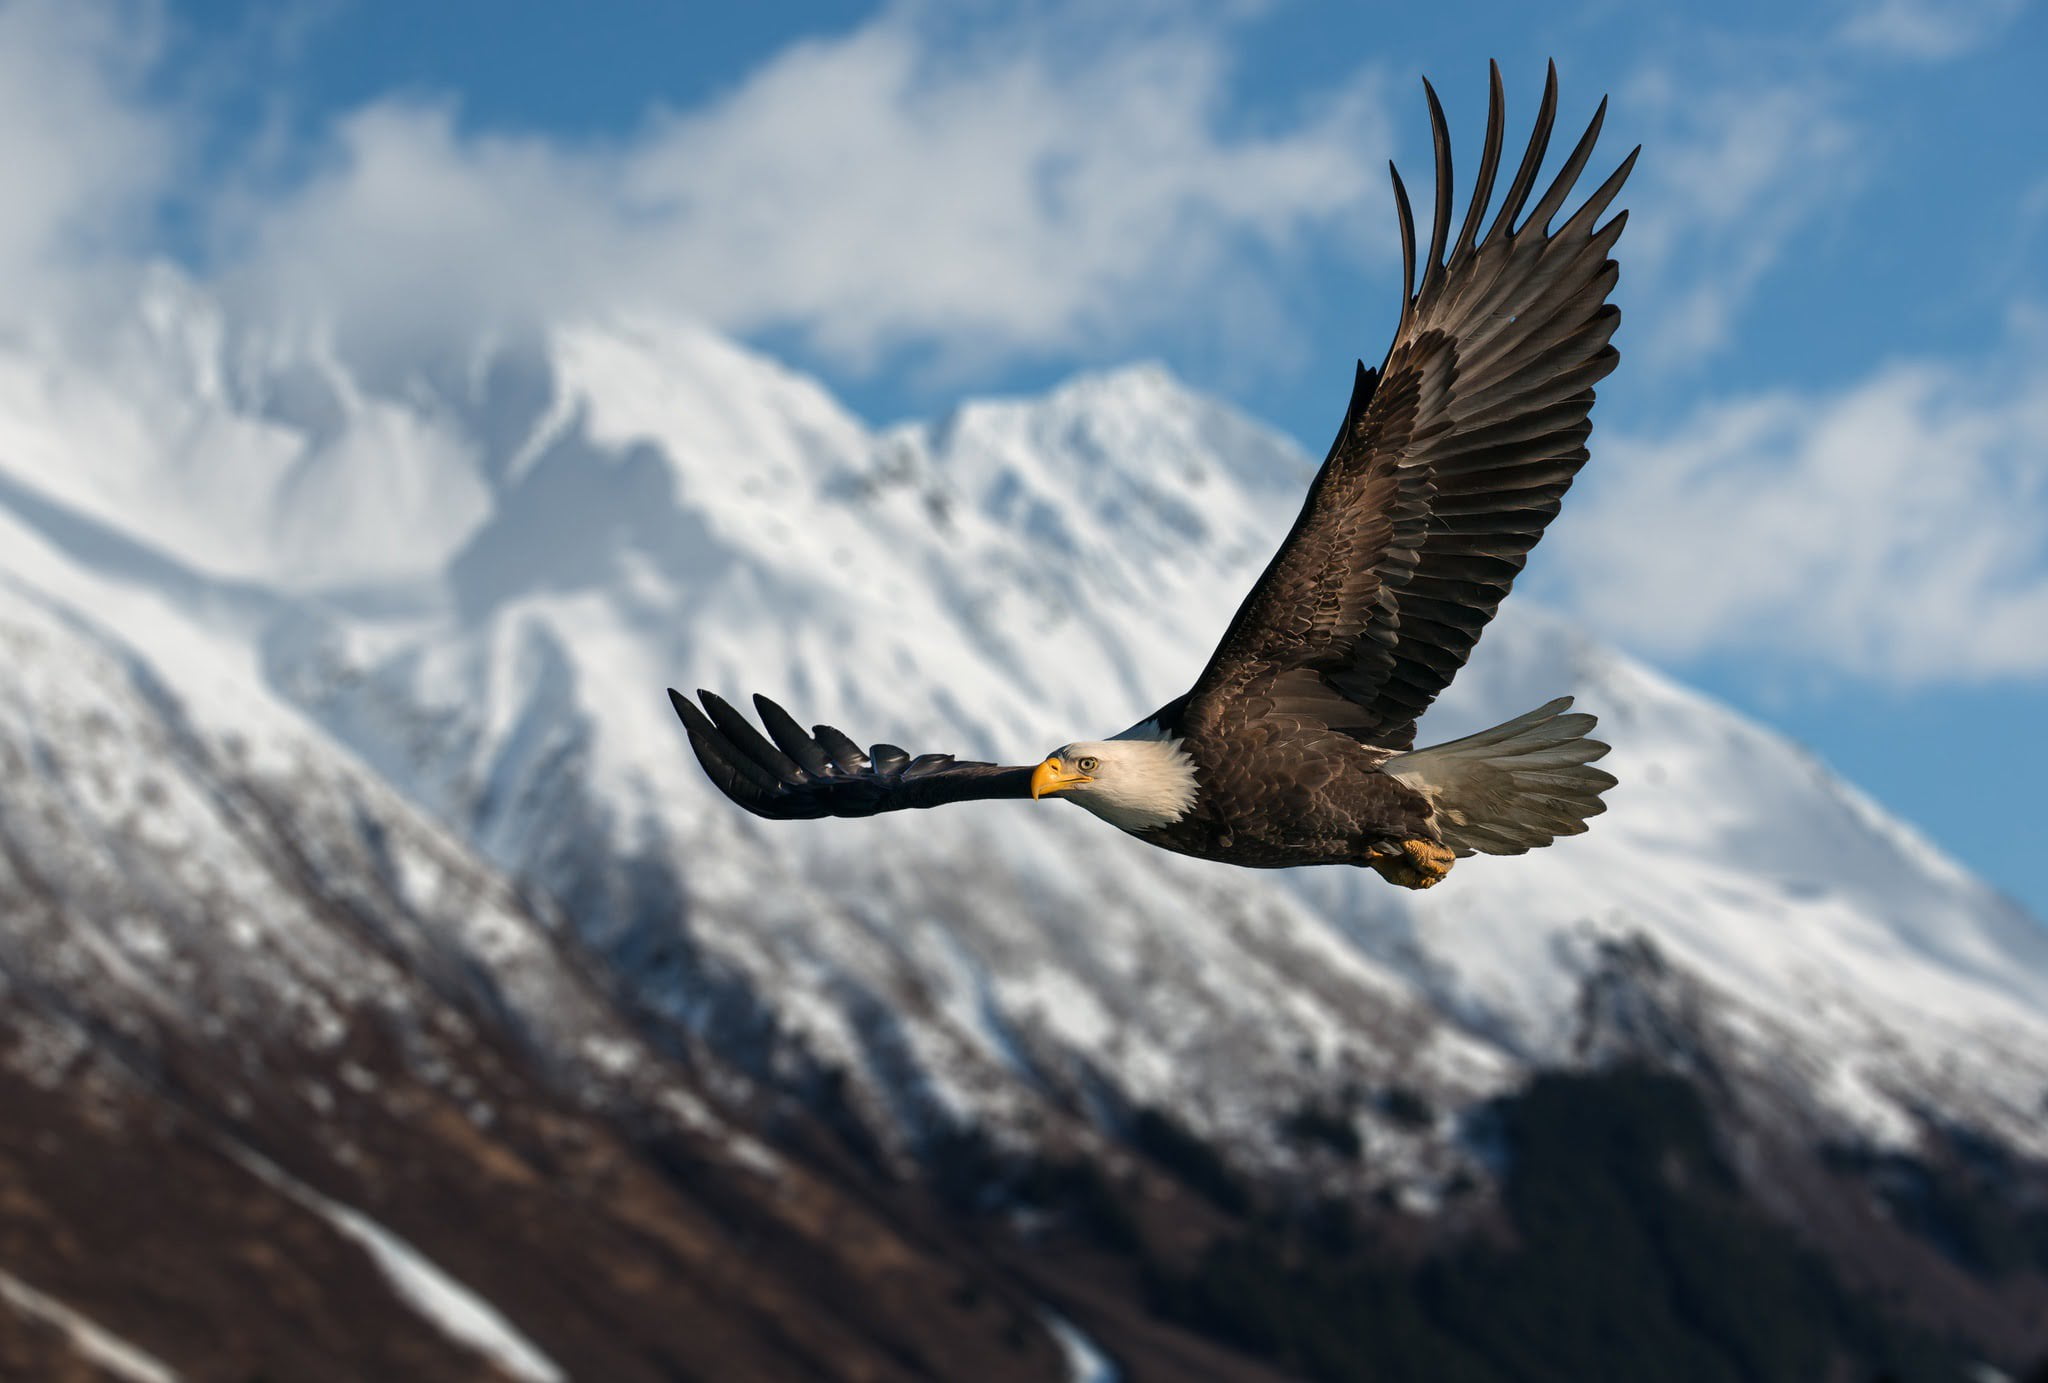 A Bald Eagle soars with the Kenai Mountains behind - the type of image that you will be able to capture during the NaturesLens Bald Eagles & Otters of Alaska Photography Holiday